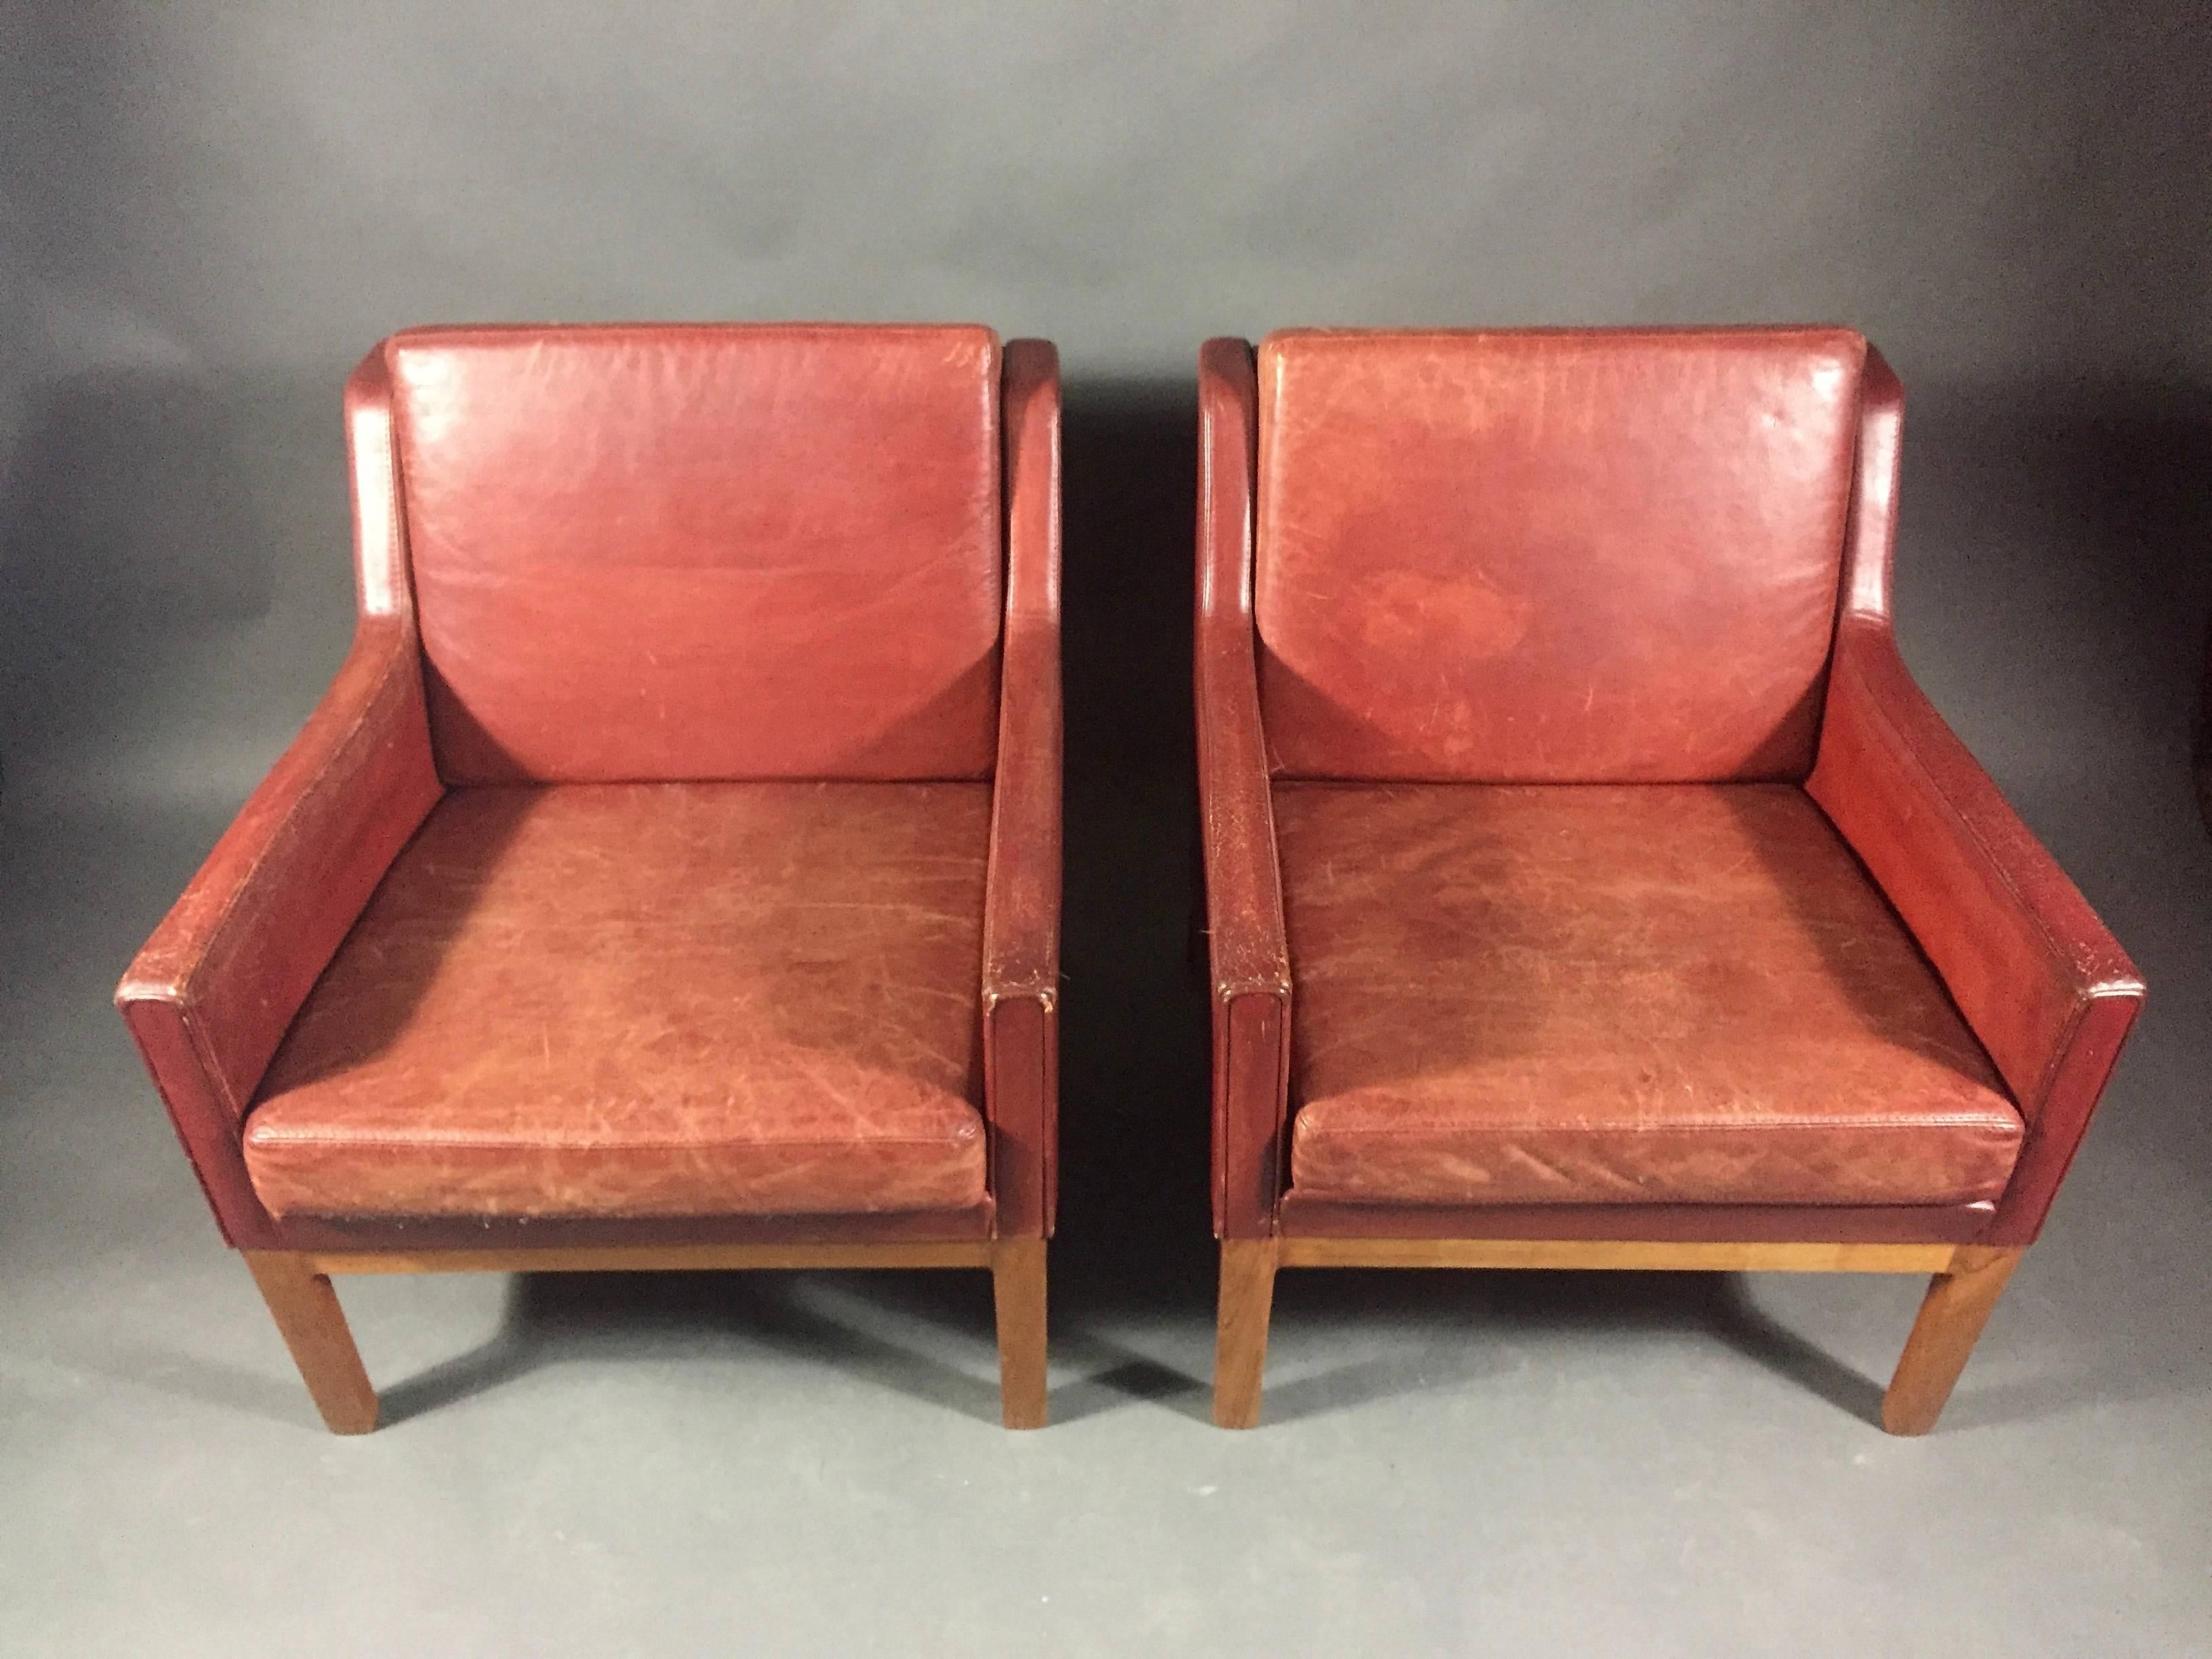 Scandinavian Modern Danish 1960s Pair of Red Leather Lounge Chairs